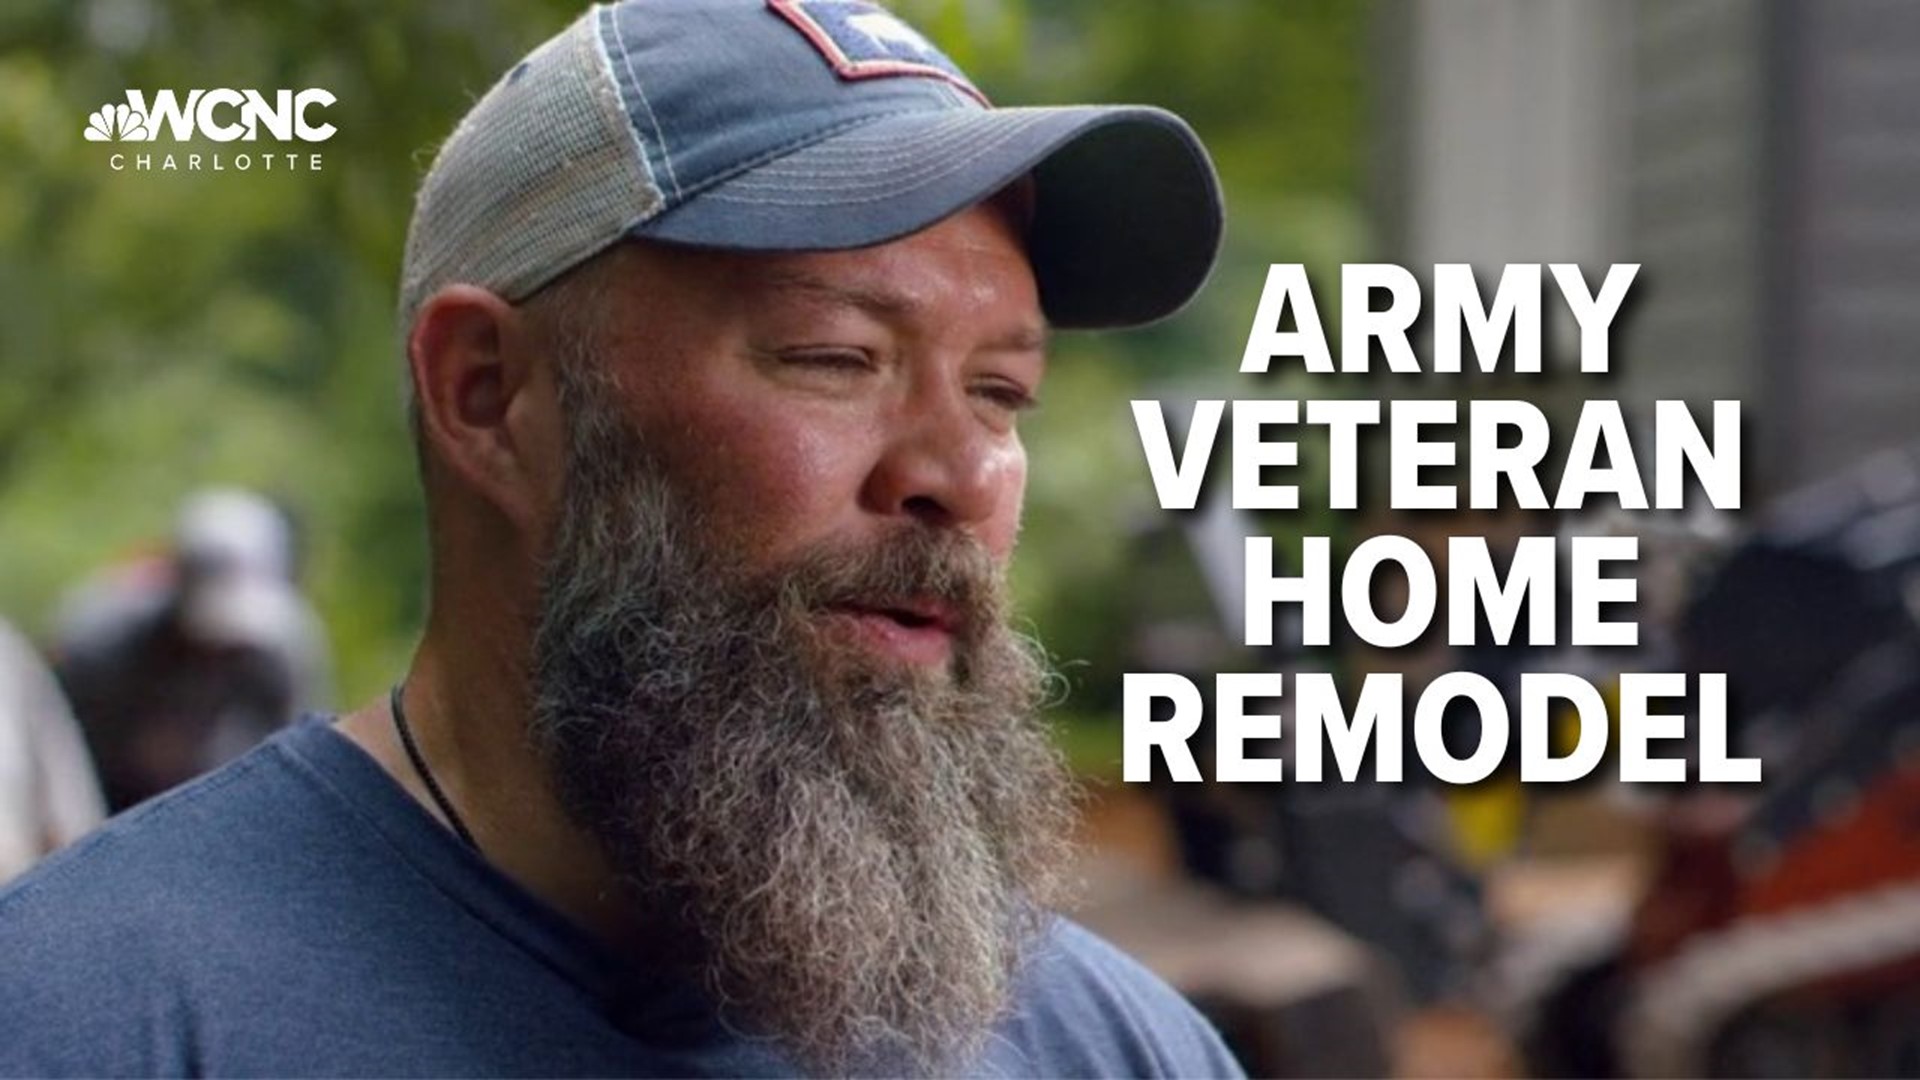 Harvey Kemp served in both Afghanistan and Iraq. Charlotte Motor Speedway and Coca-Cola surprised the veteran with home renovations.